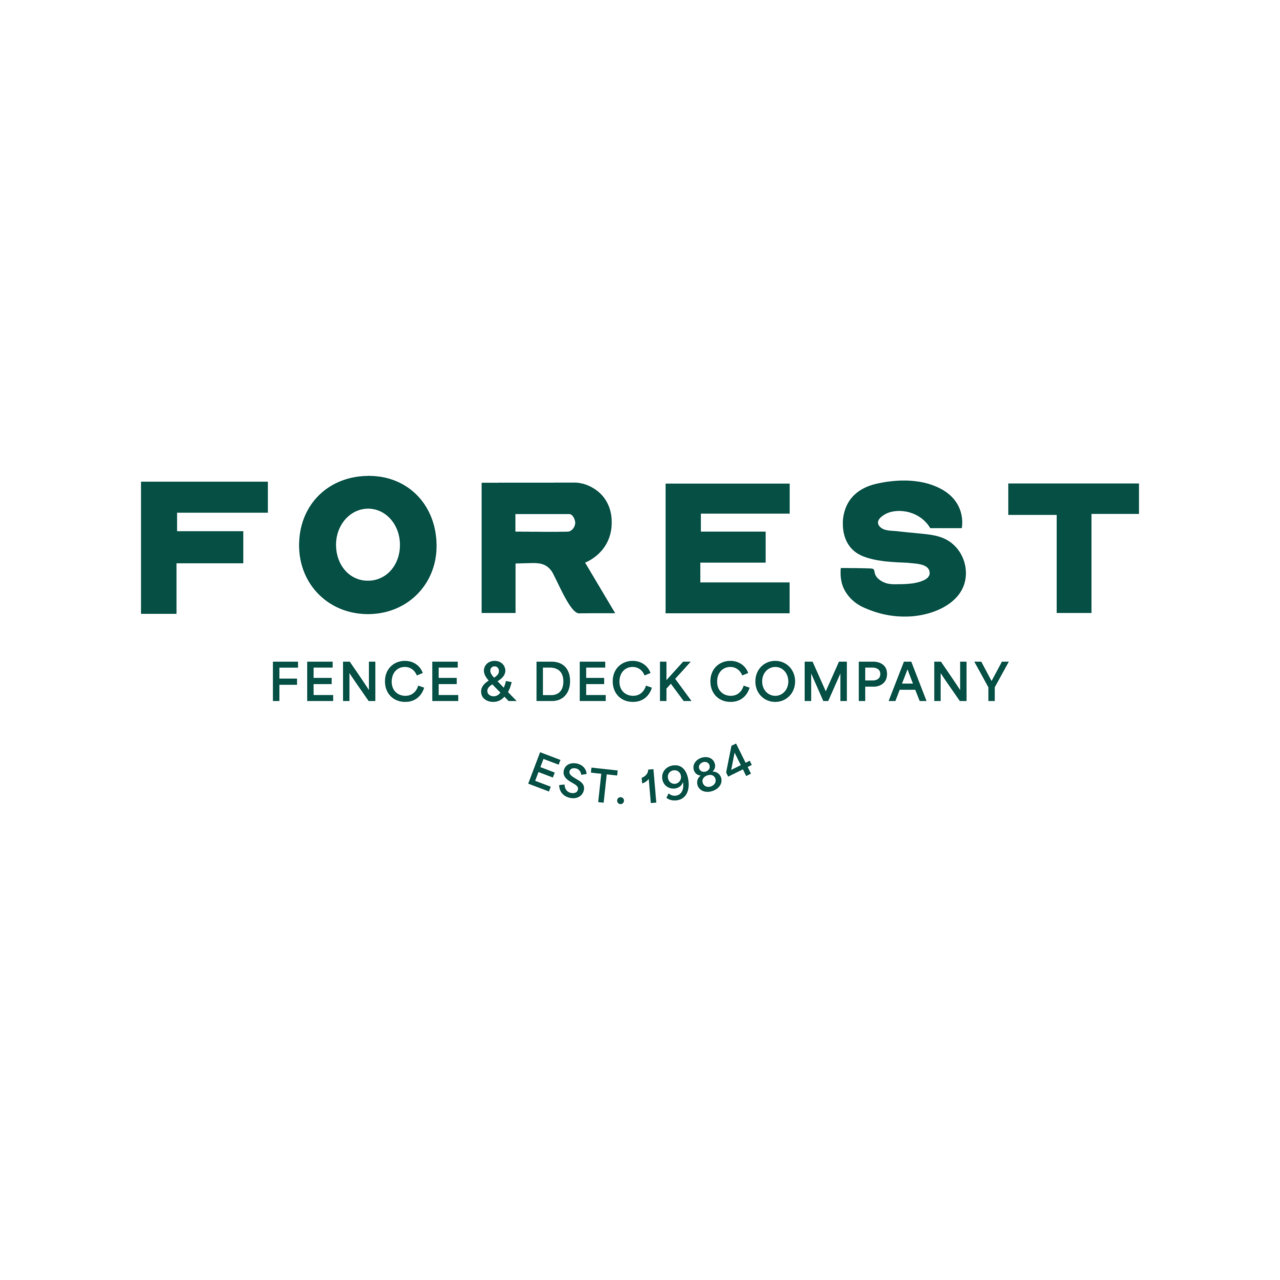 Forest Fence & Deck Company Ltd's logo